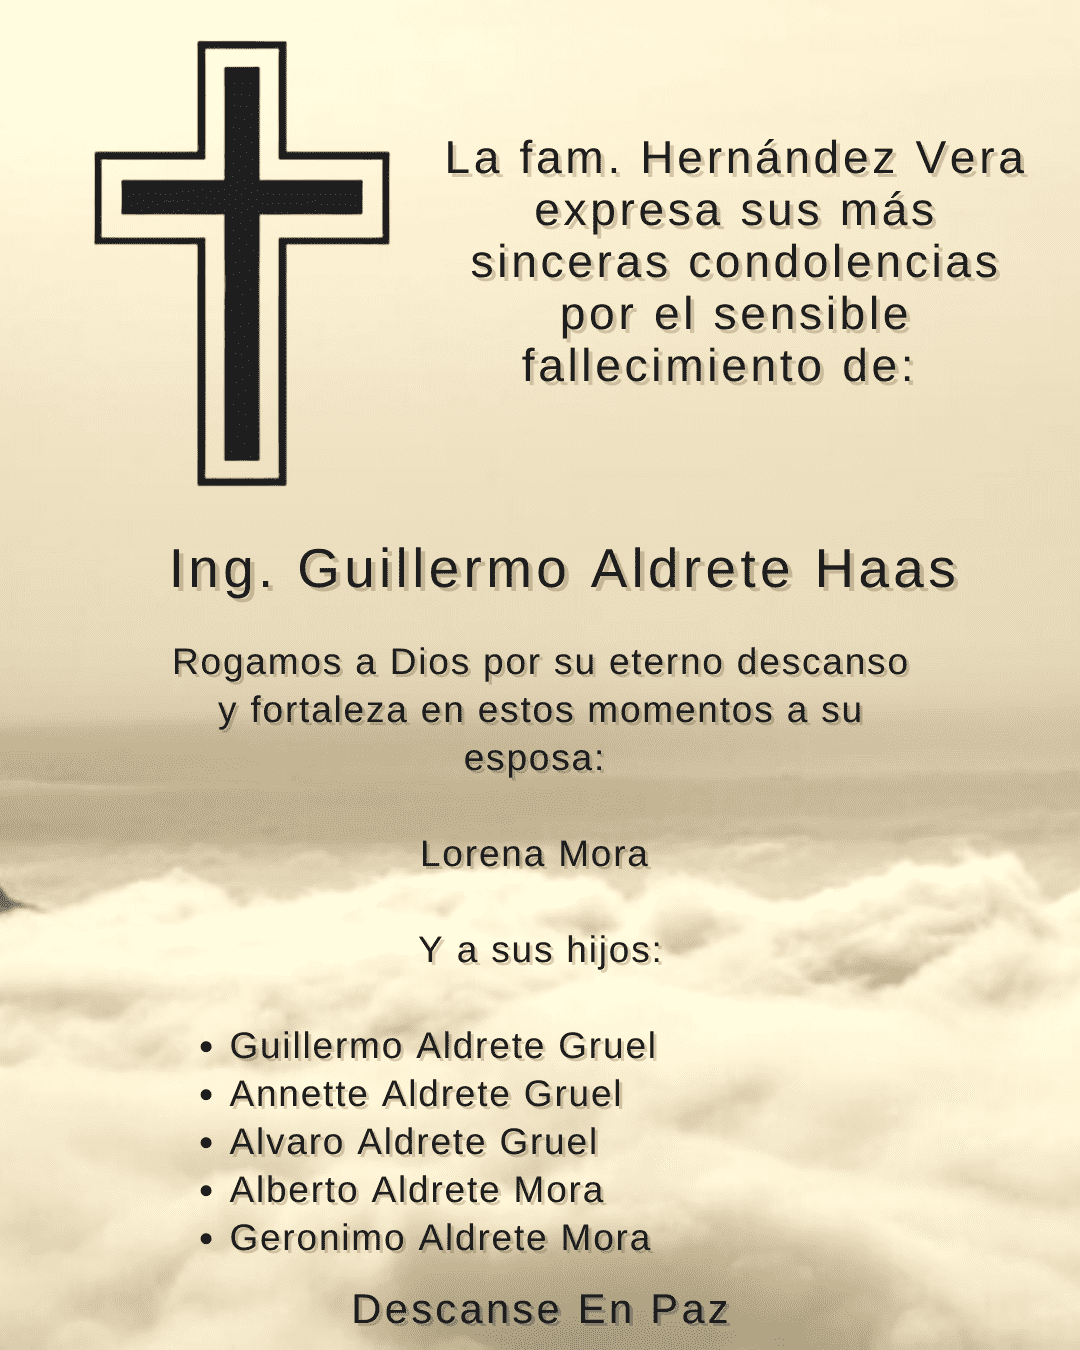 Ing. Guillermo Aldrete Haas